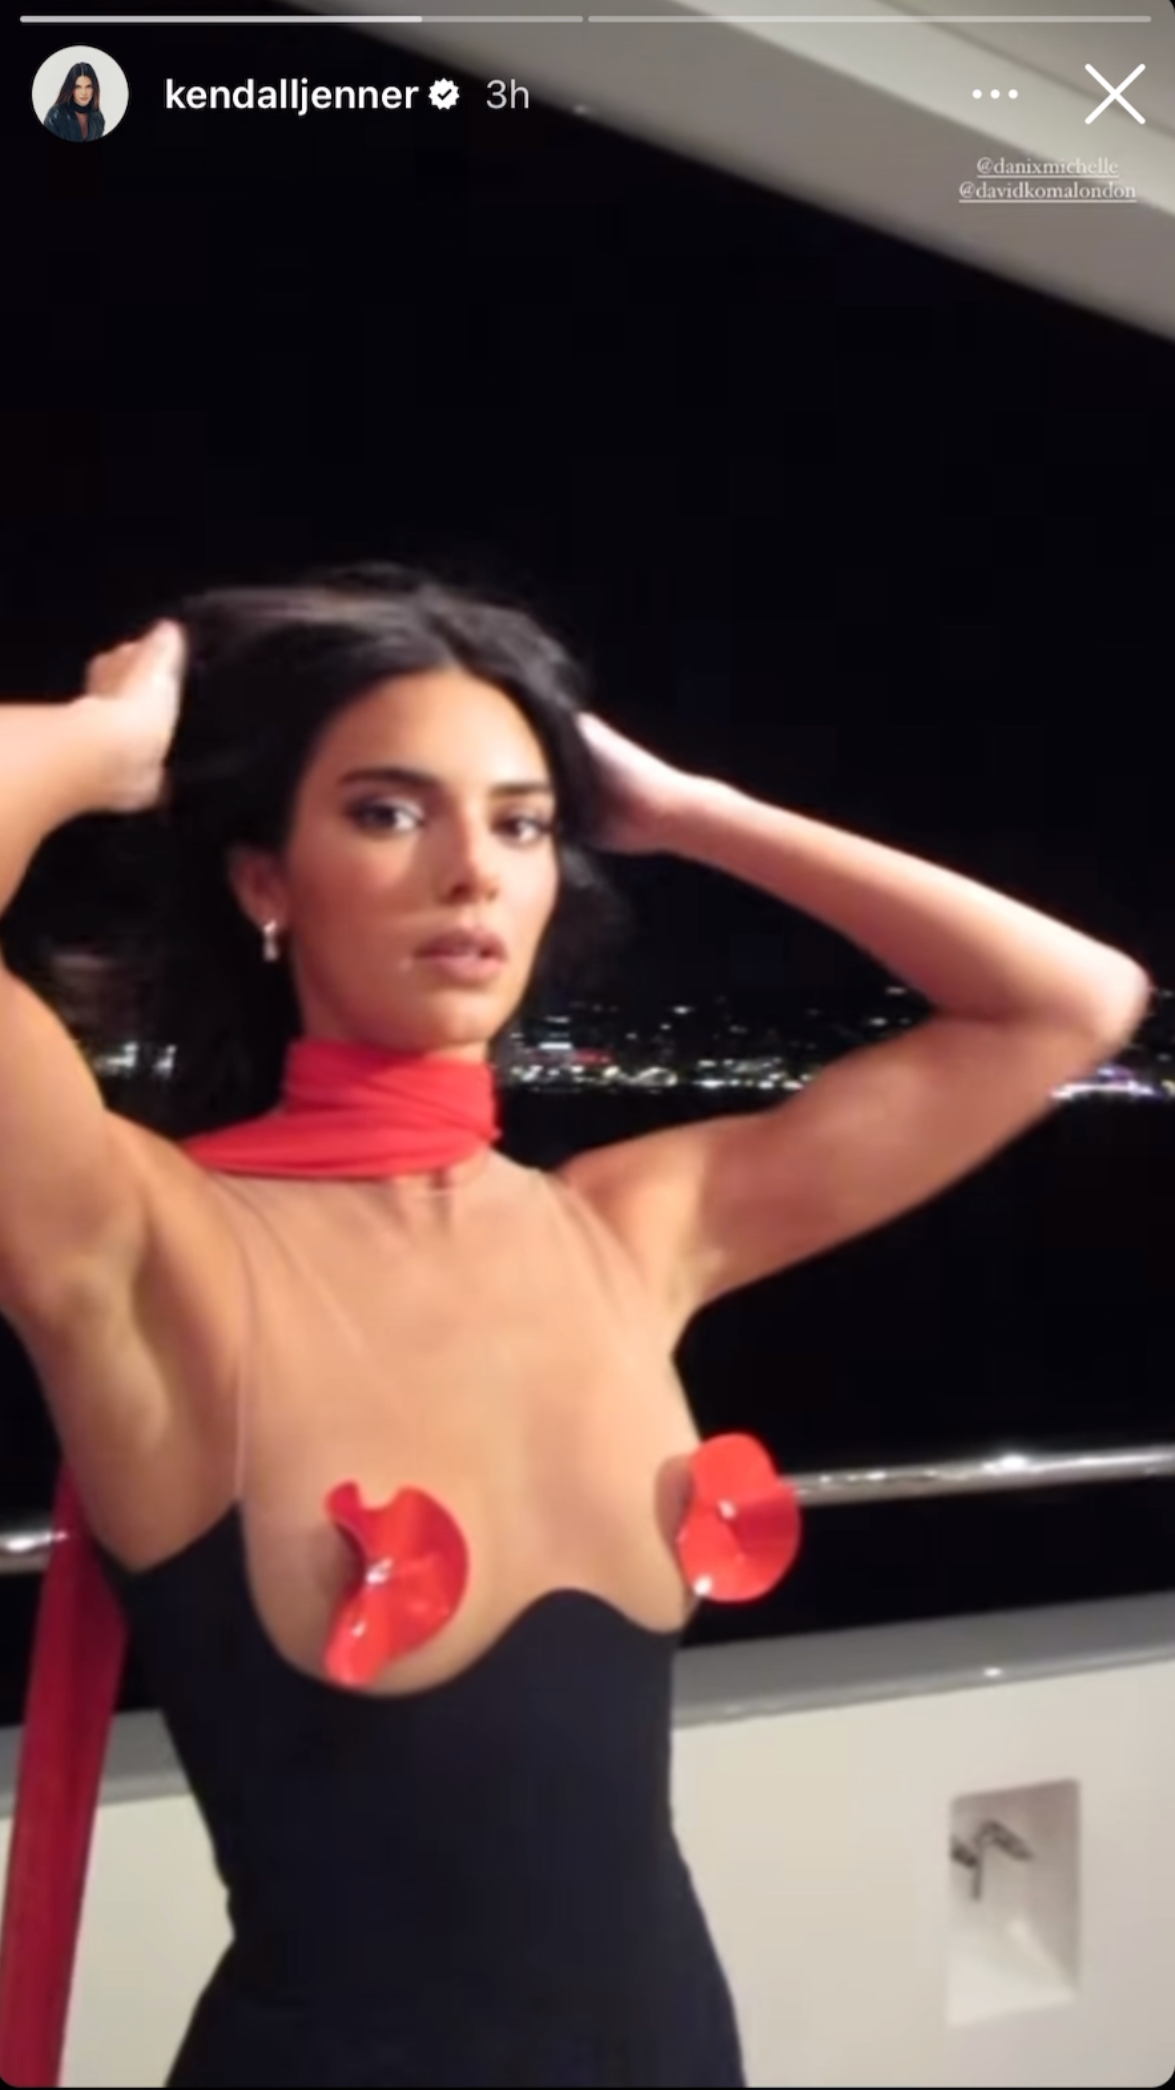 dorothy j wallace recommends kendall jenner nude video pic